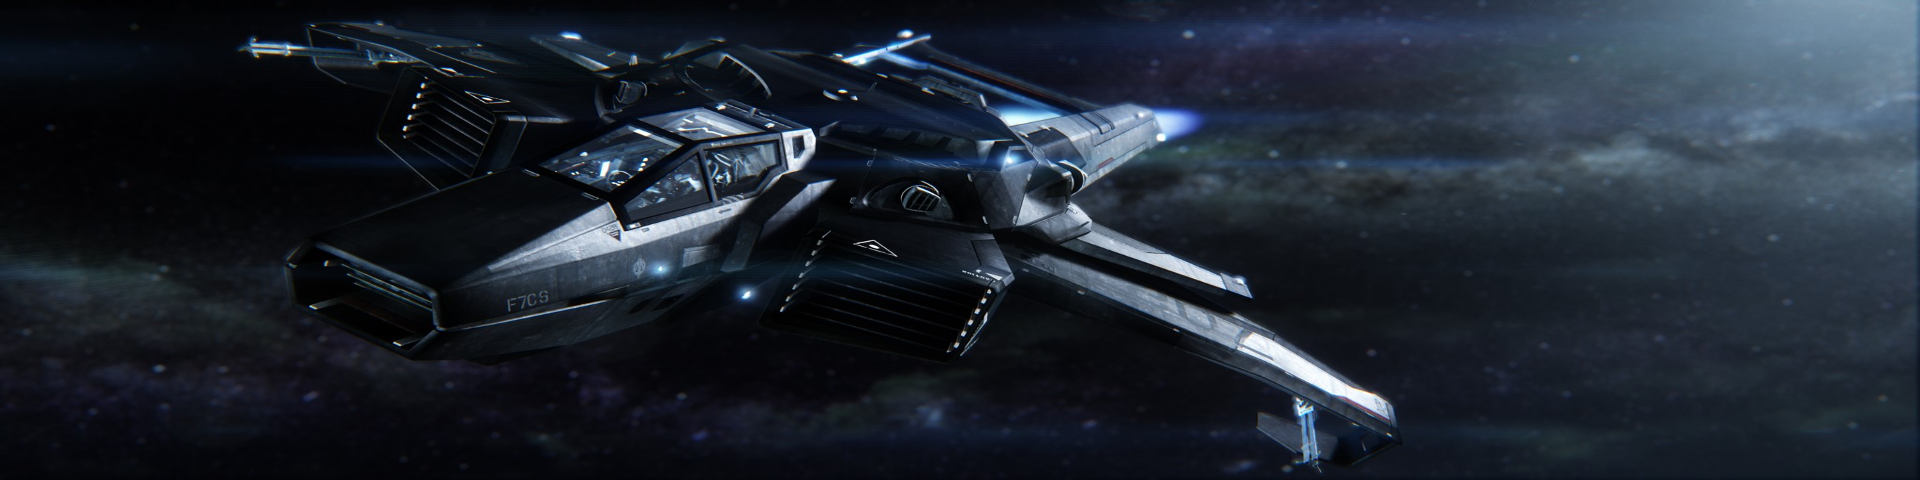 A box-chassis fighter on the burn in deep space.